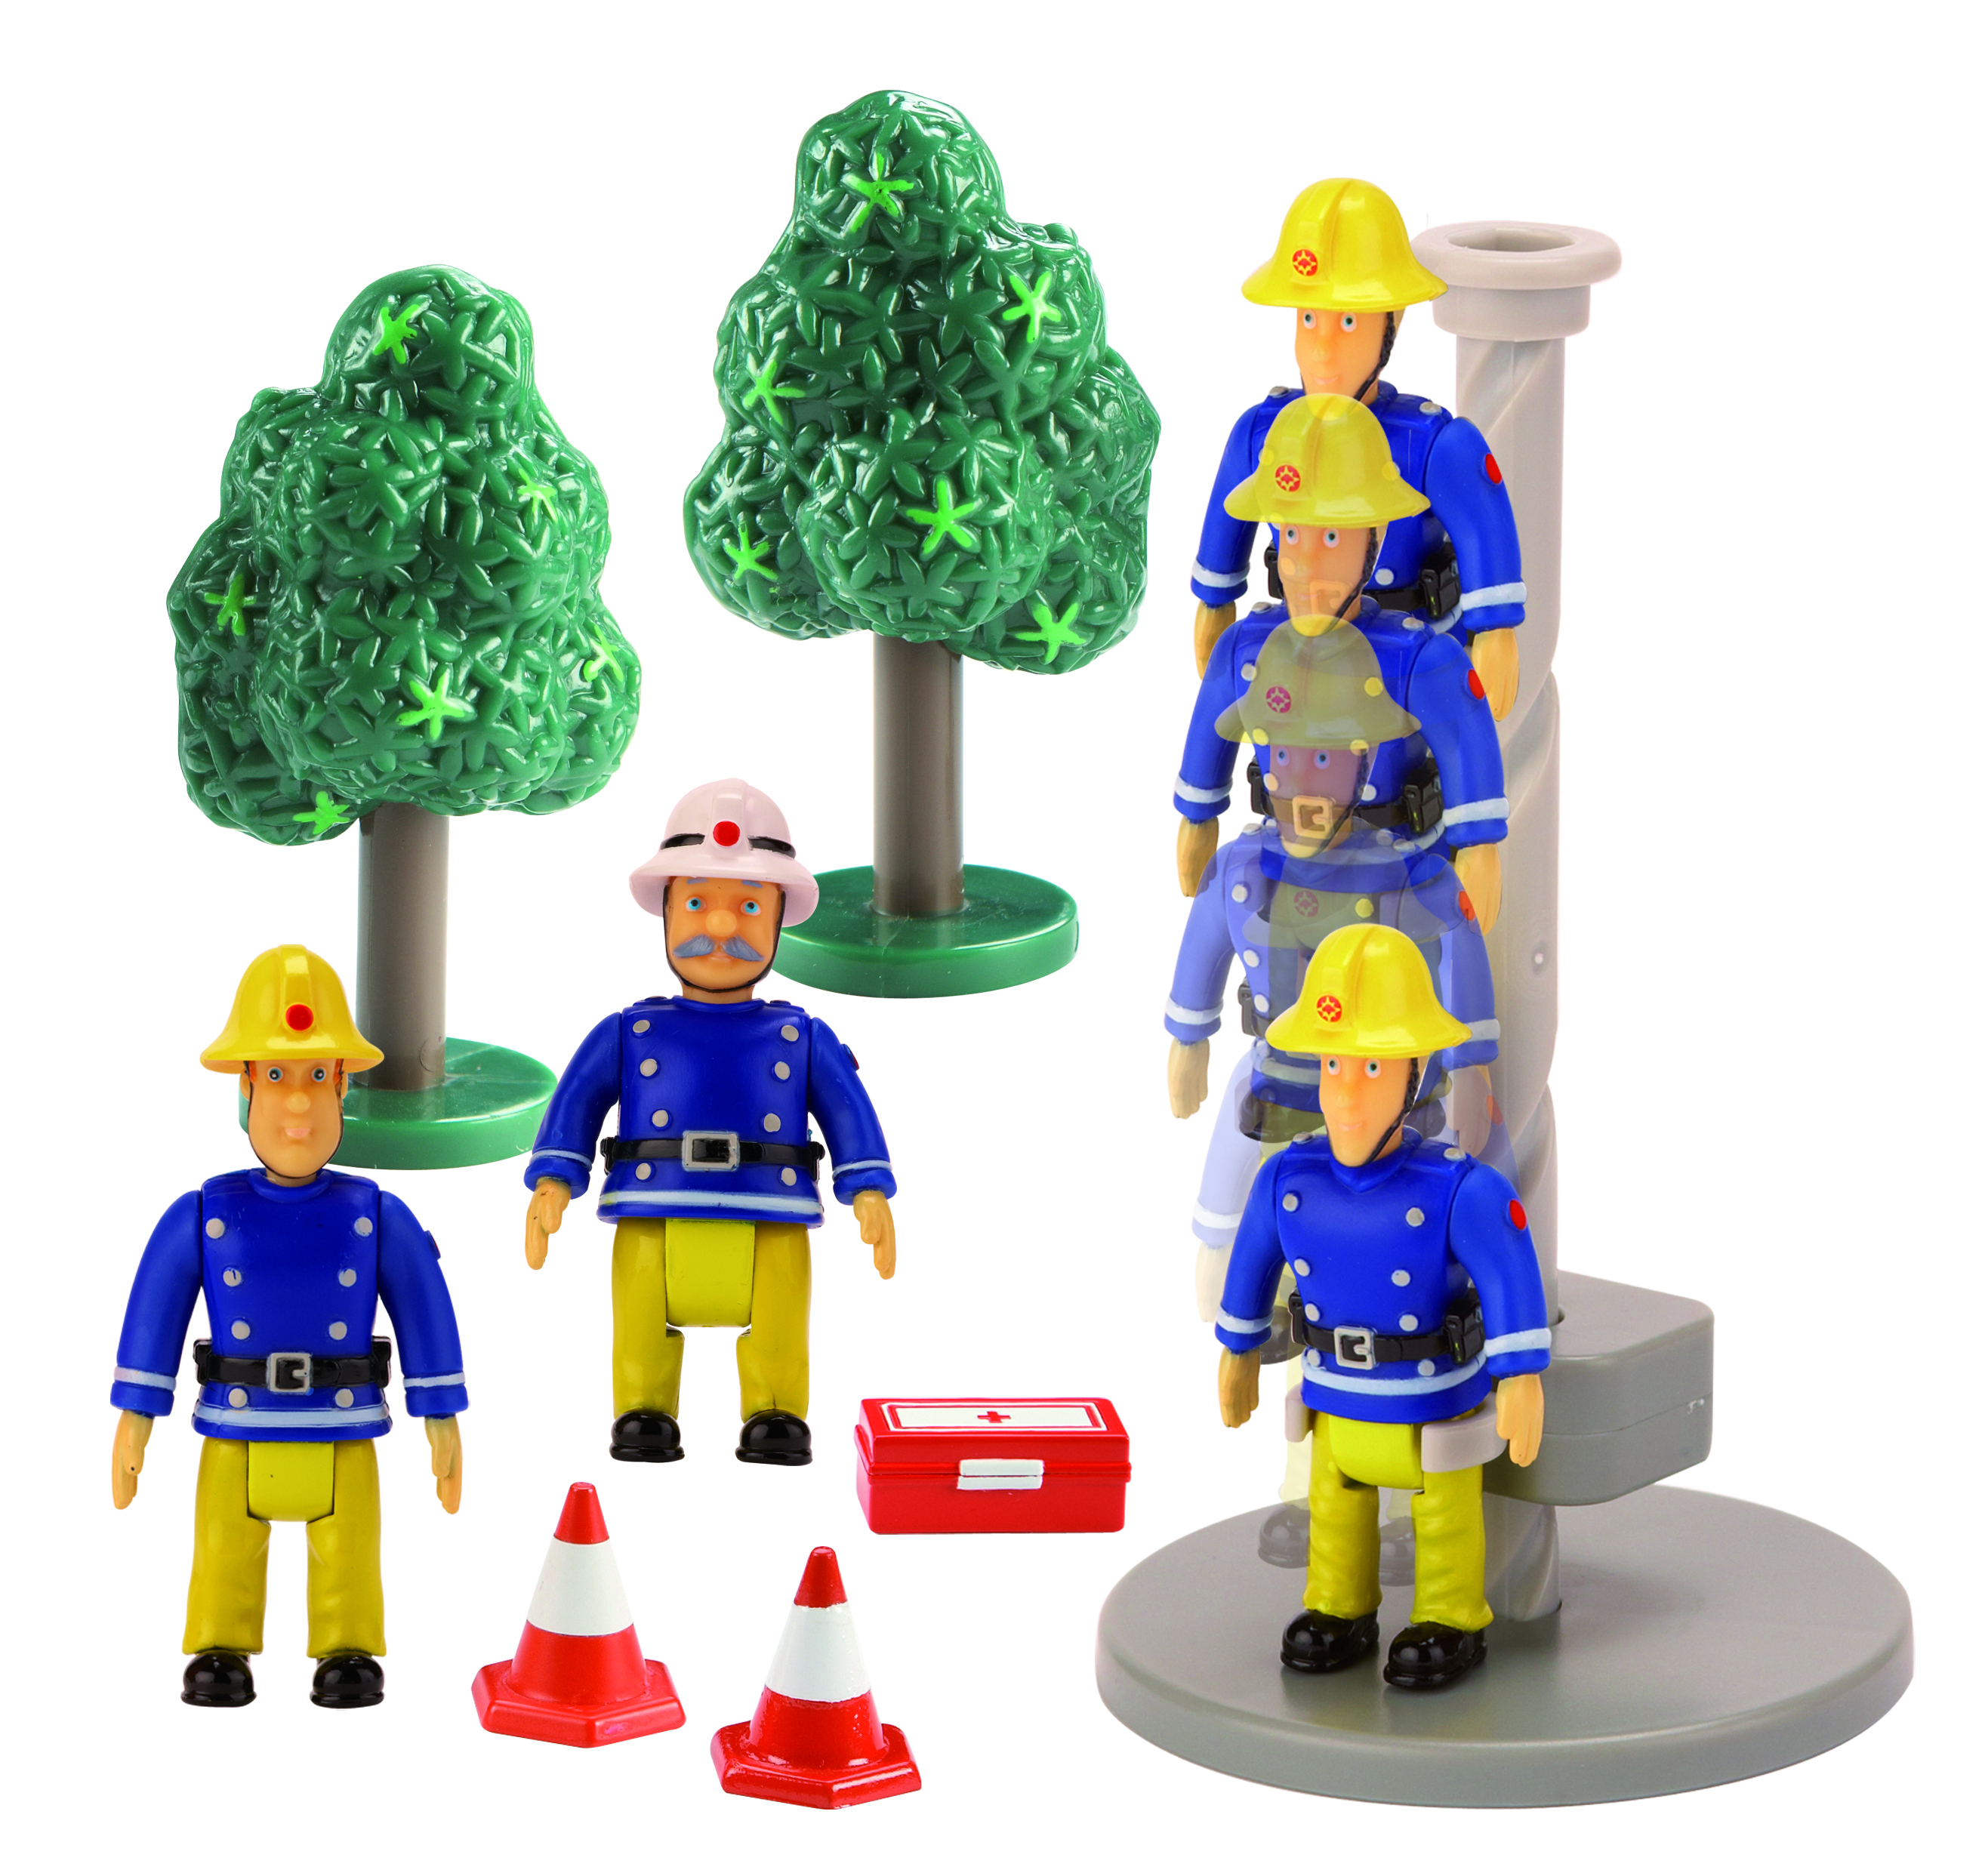 Fireman Sam Figures And Accessory Pack